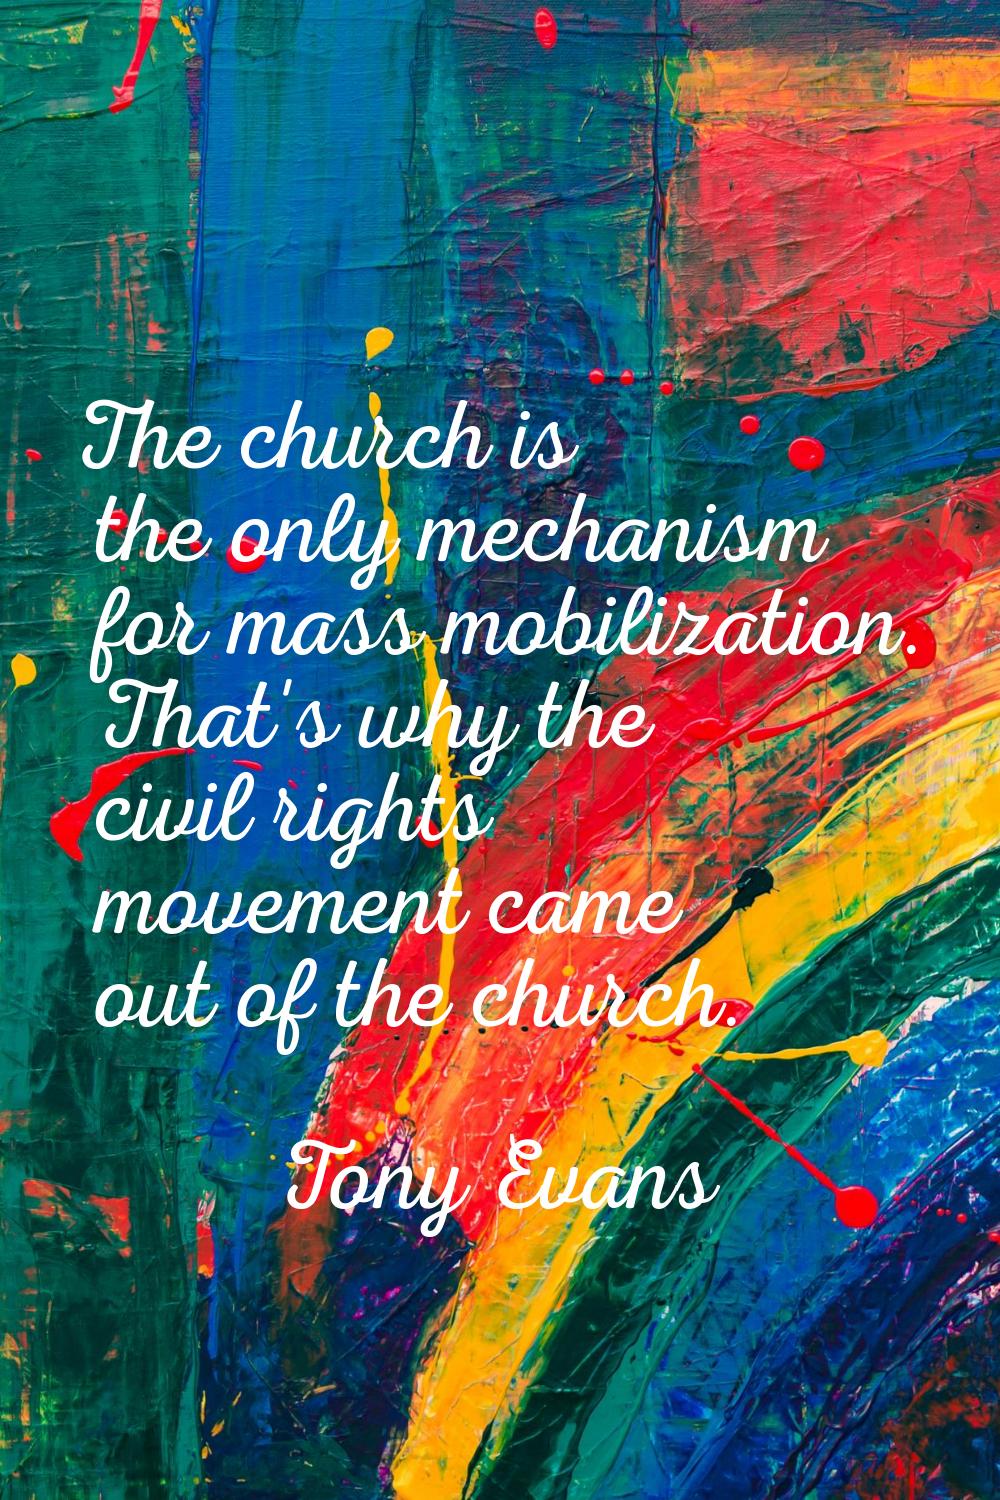 The church is the only mechanism for mass mobilization. That's why the civil rights movement came o